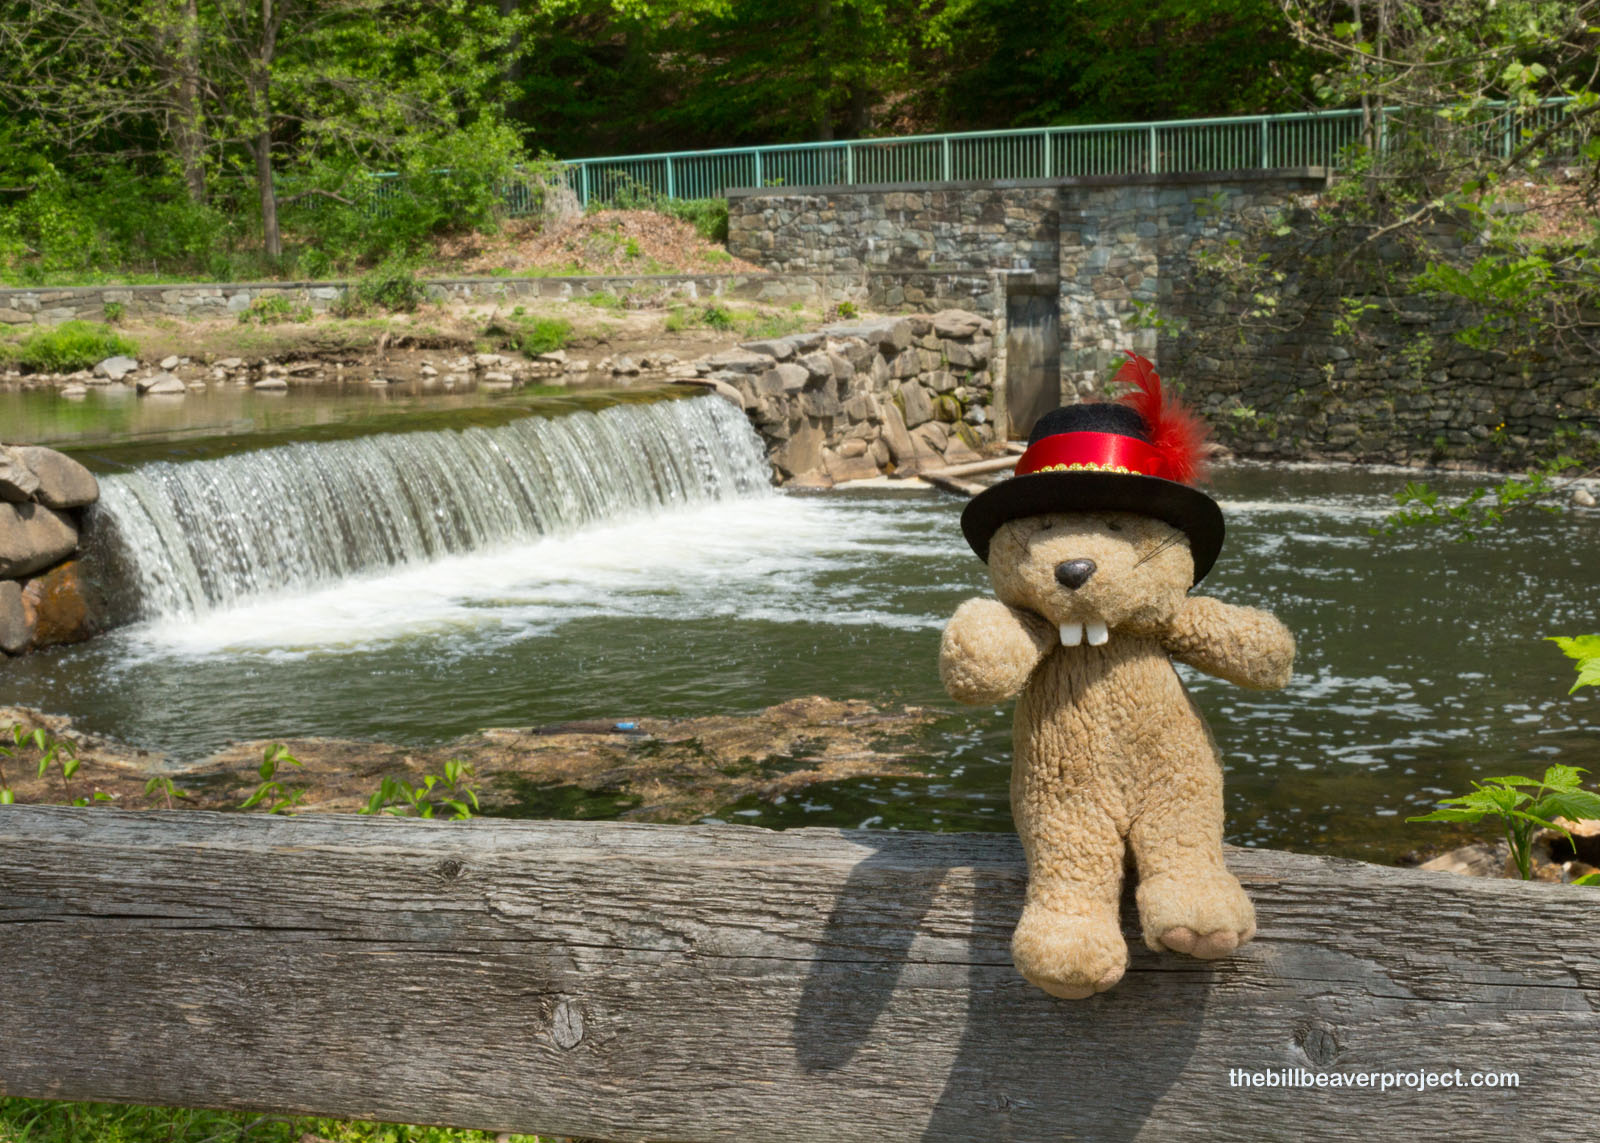 A very fine dam at Peirce Mill!